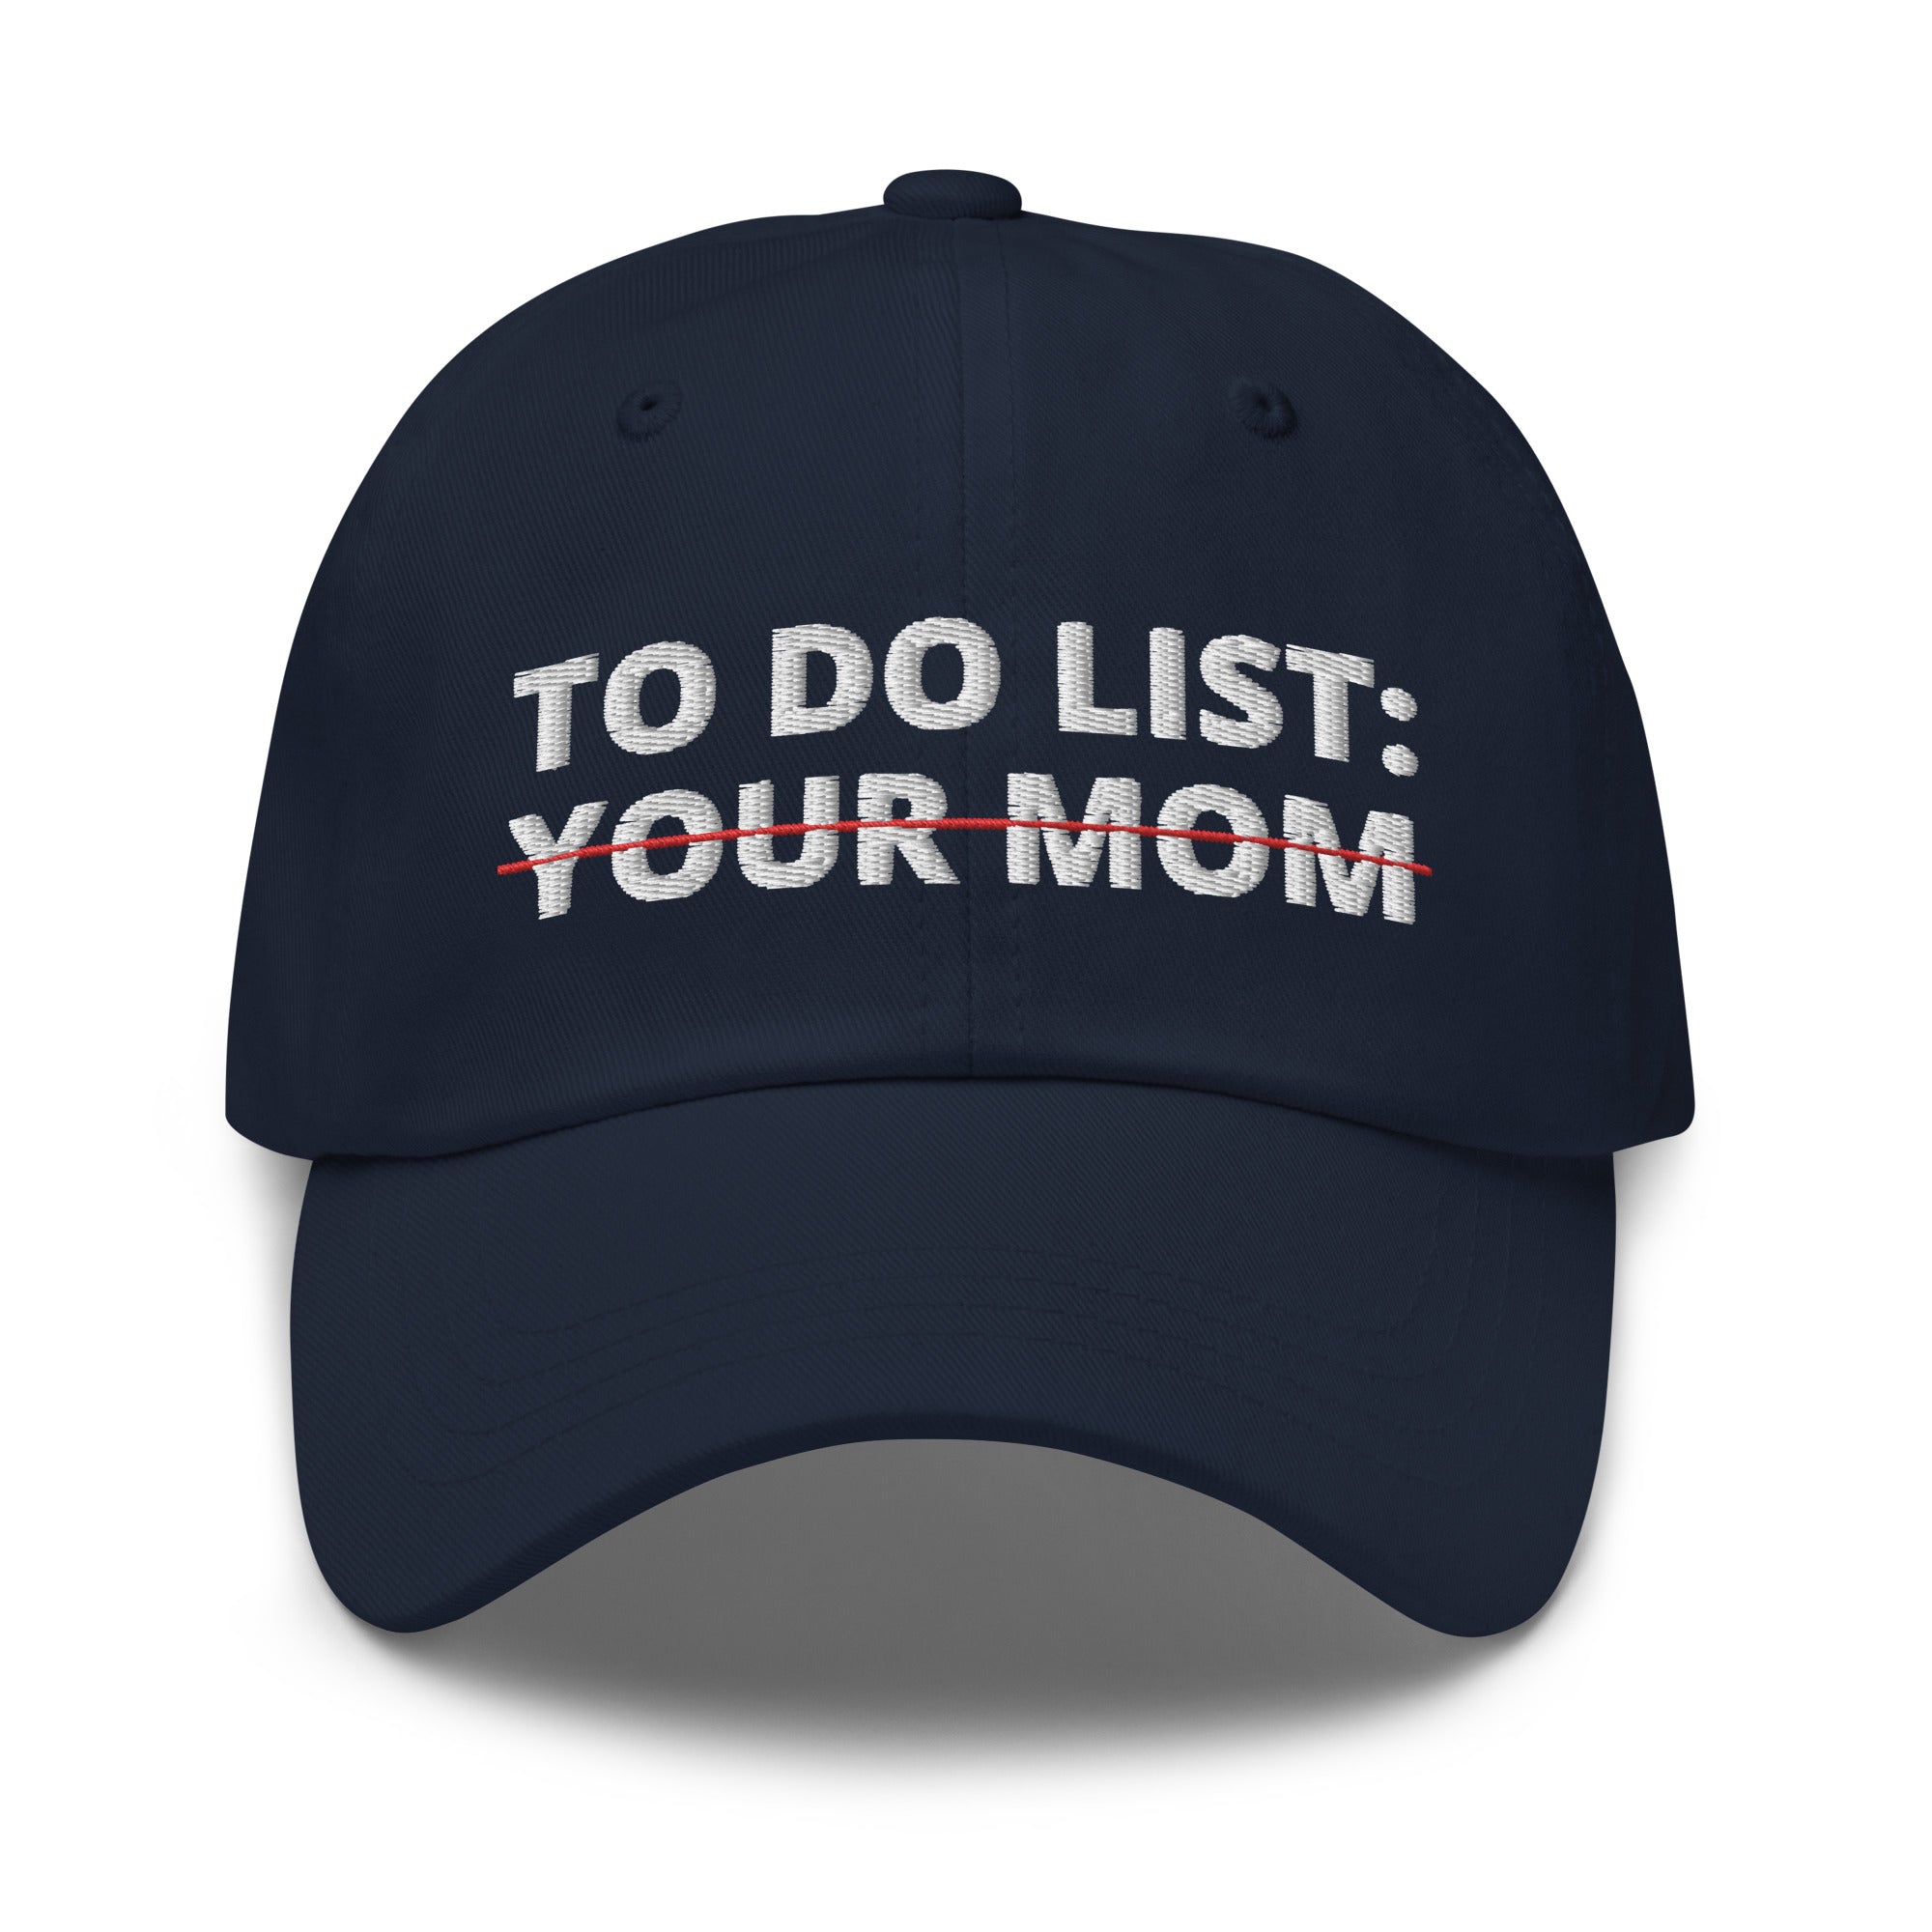 To Do List Your Mom Hat, Funny To Do List, Sarcastic To Do List, Sarcastic Gifts, Adult Humor Hat, Your Mom Cap, Funny Mom Jokes, Funny Hats